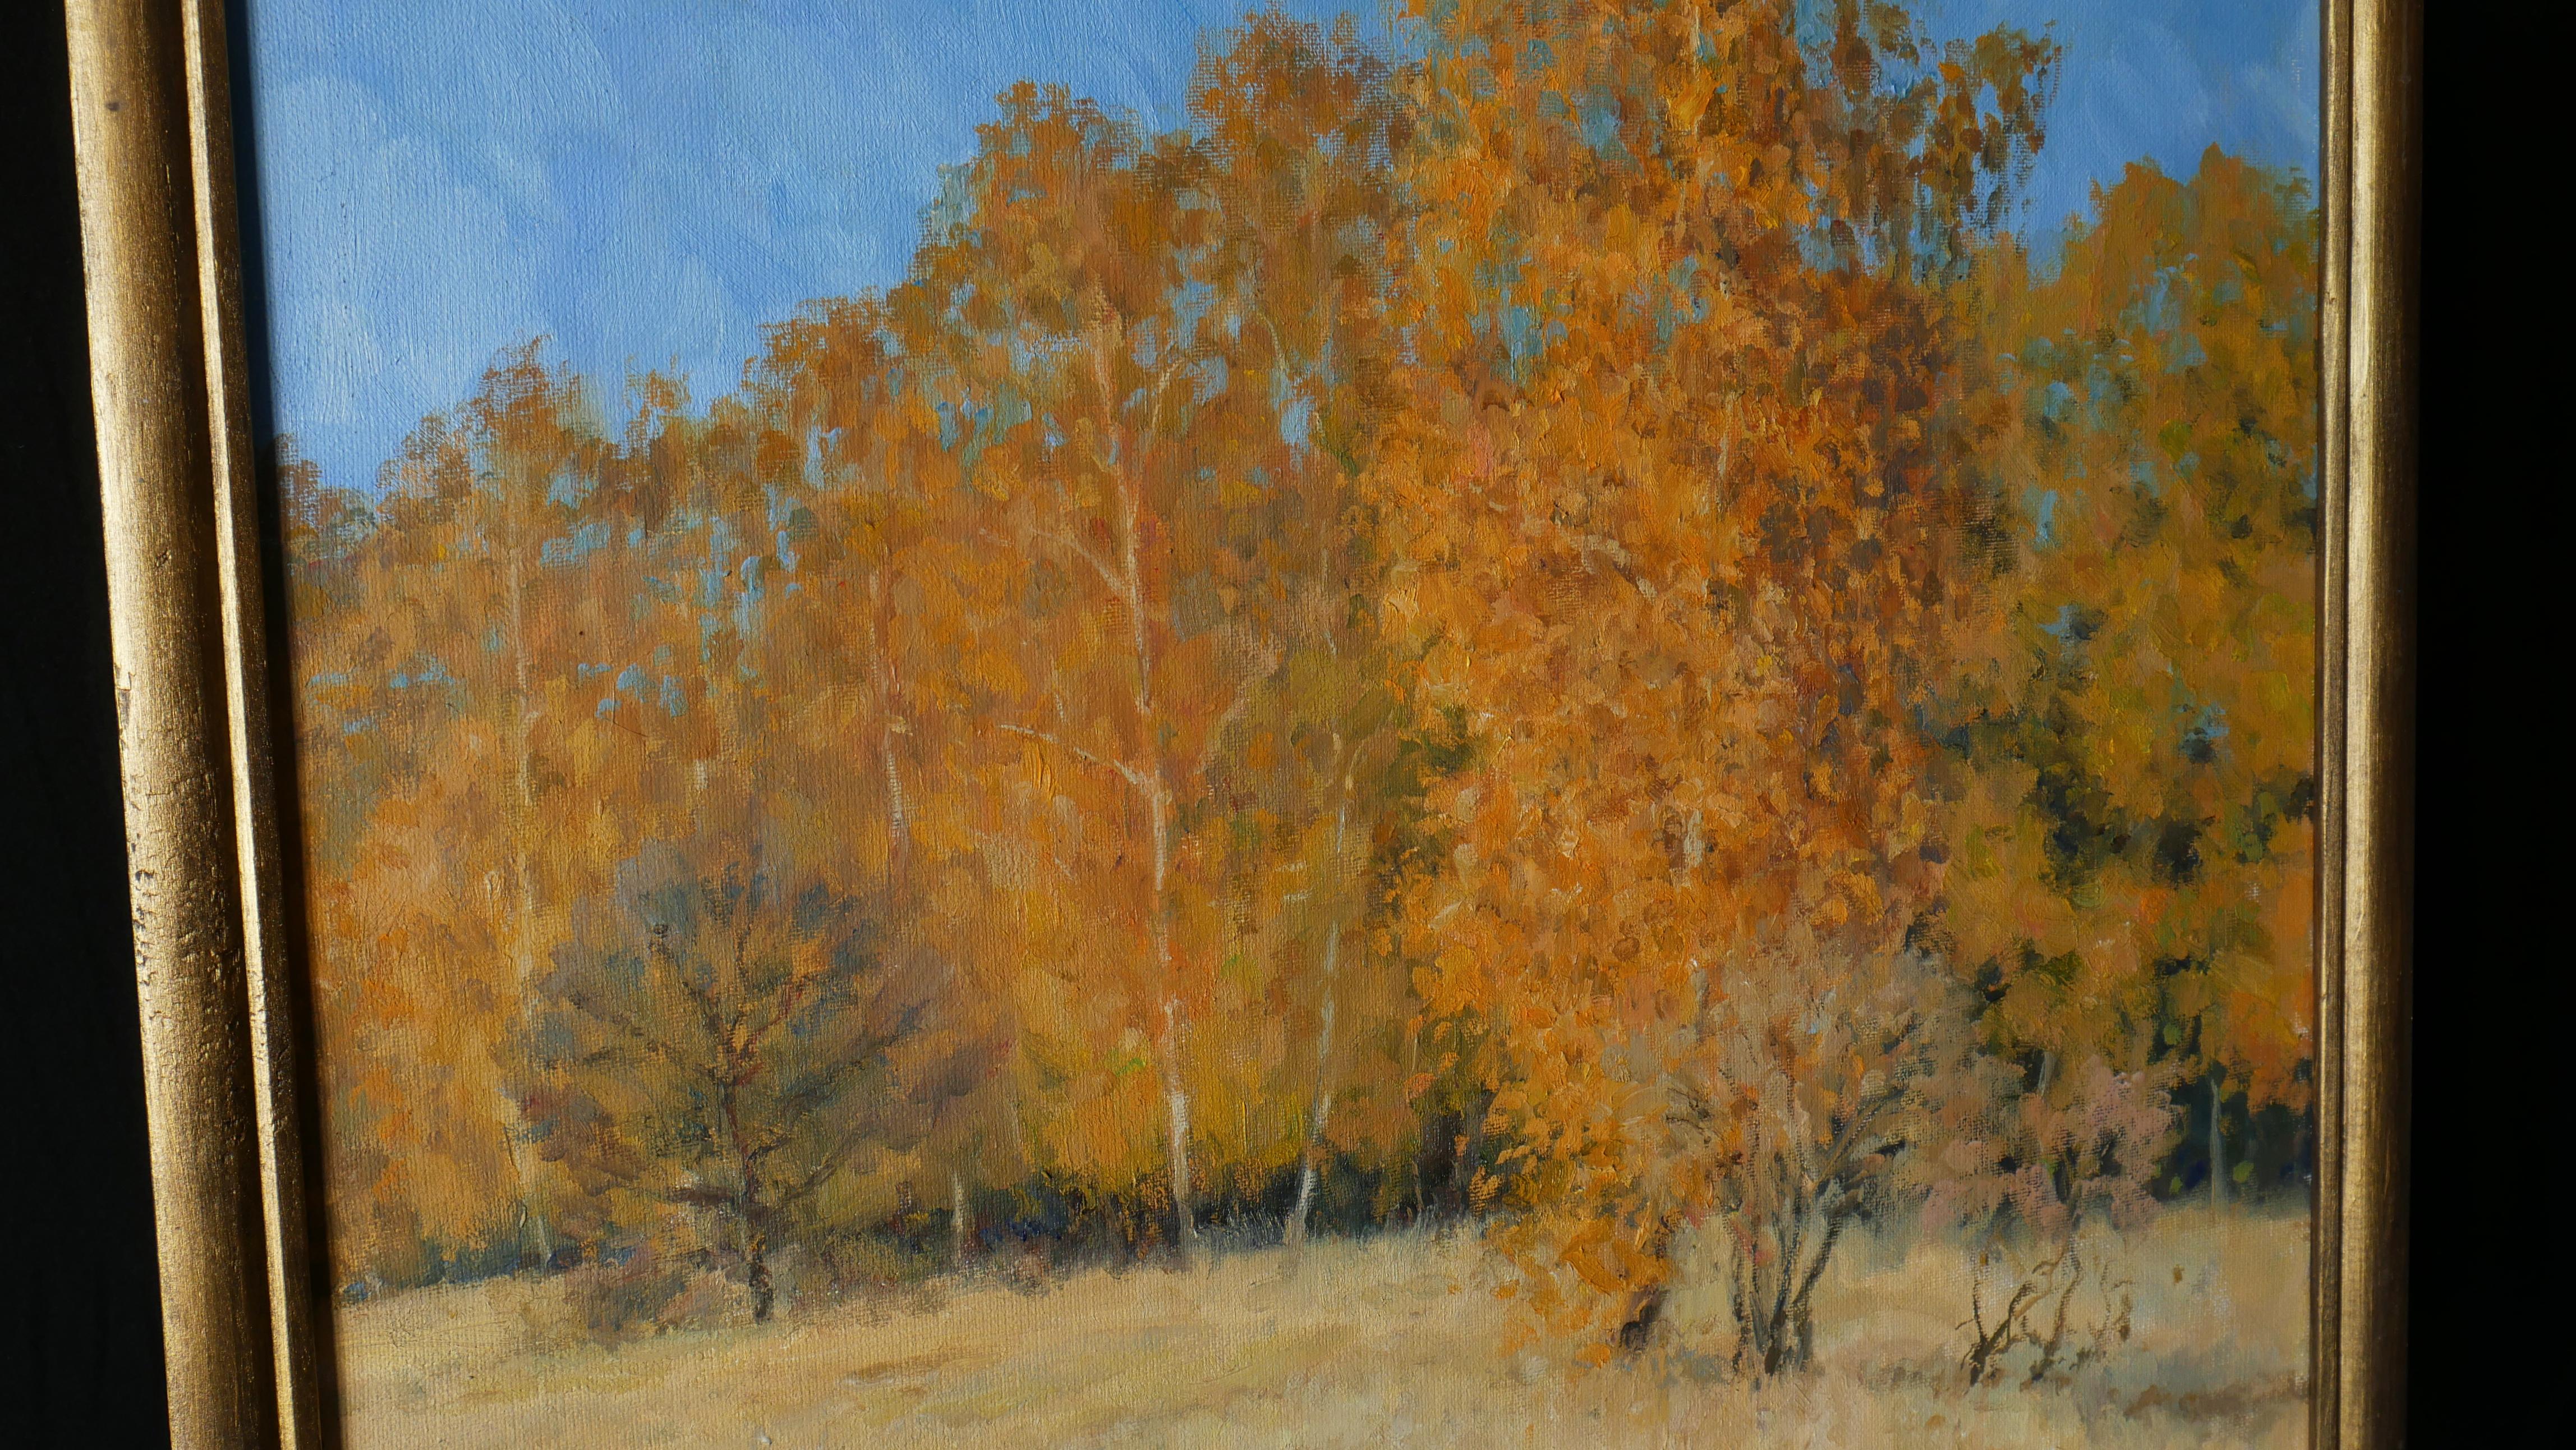 Gold Of Autumn - sunny autumn landscape painting - Impressionist Painting by Nikolay Dmitriev